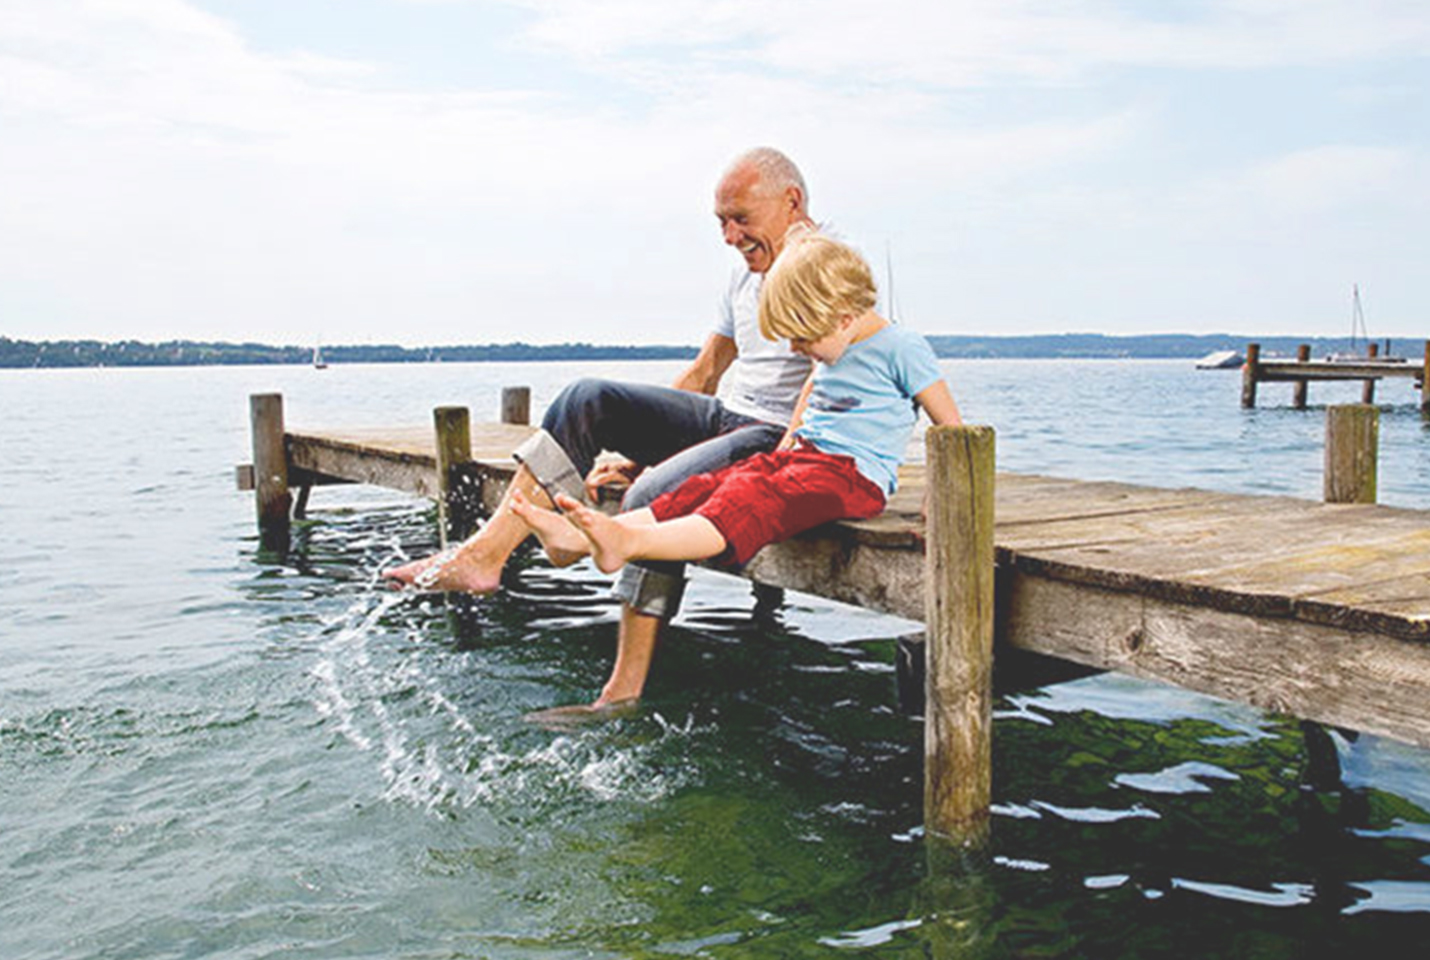 A grandfather and young boy splashing their feet on a dock at a lake